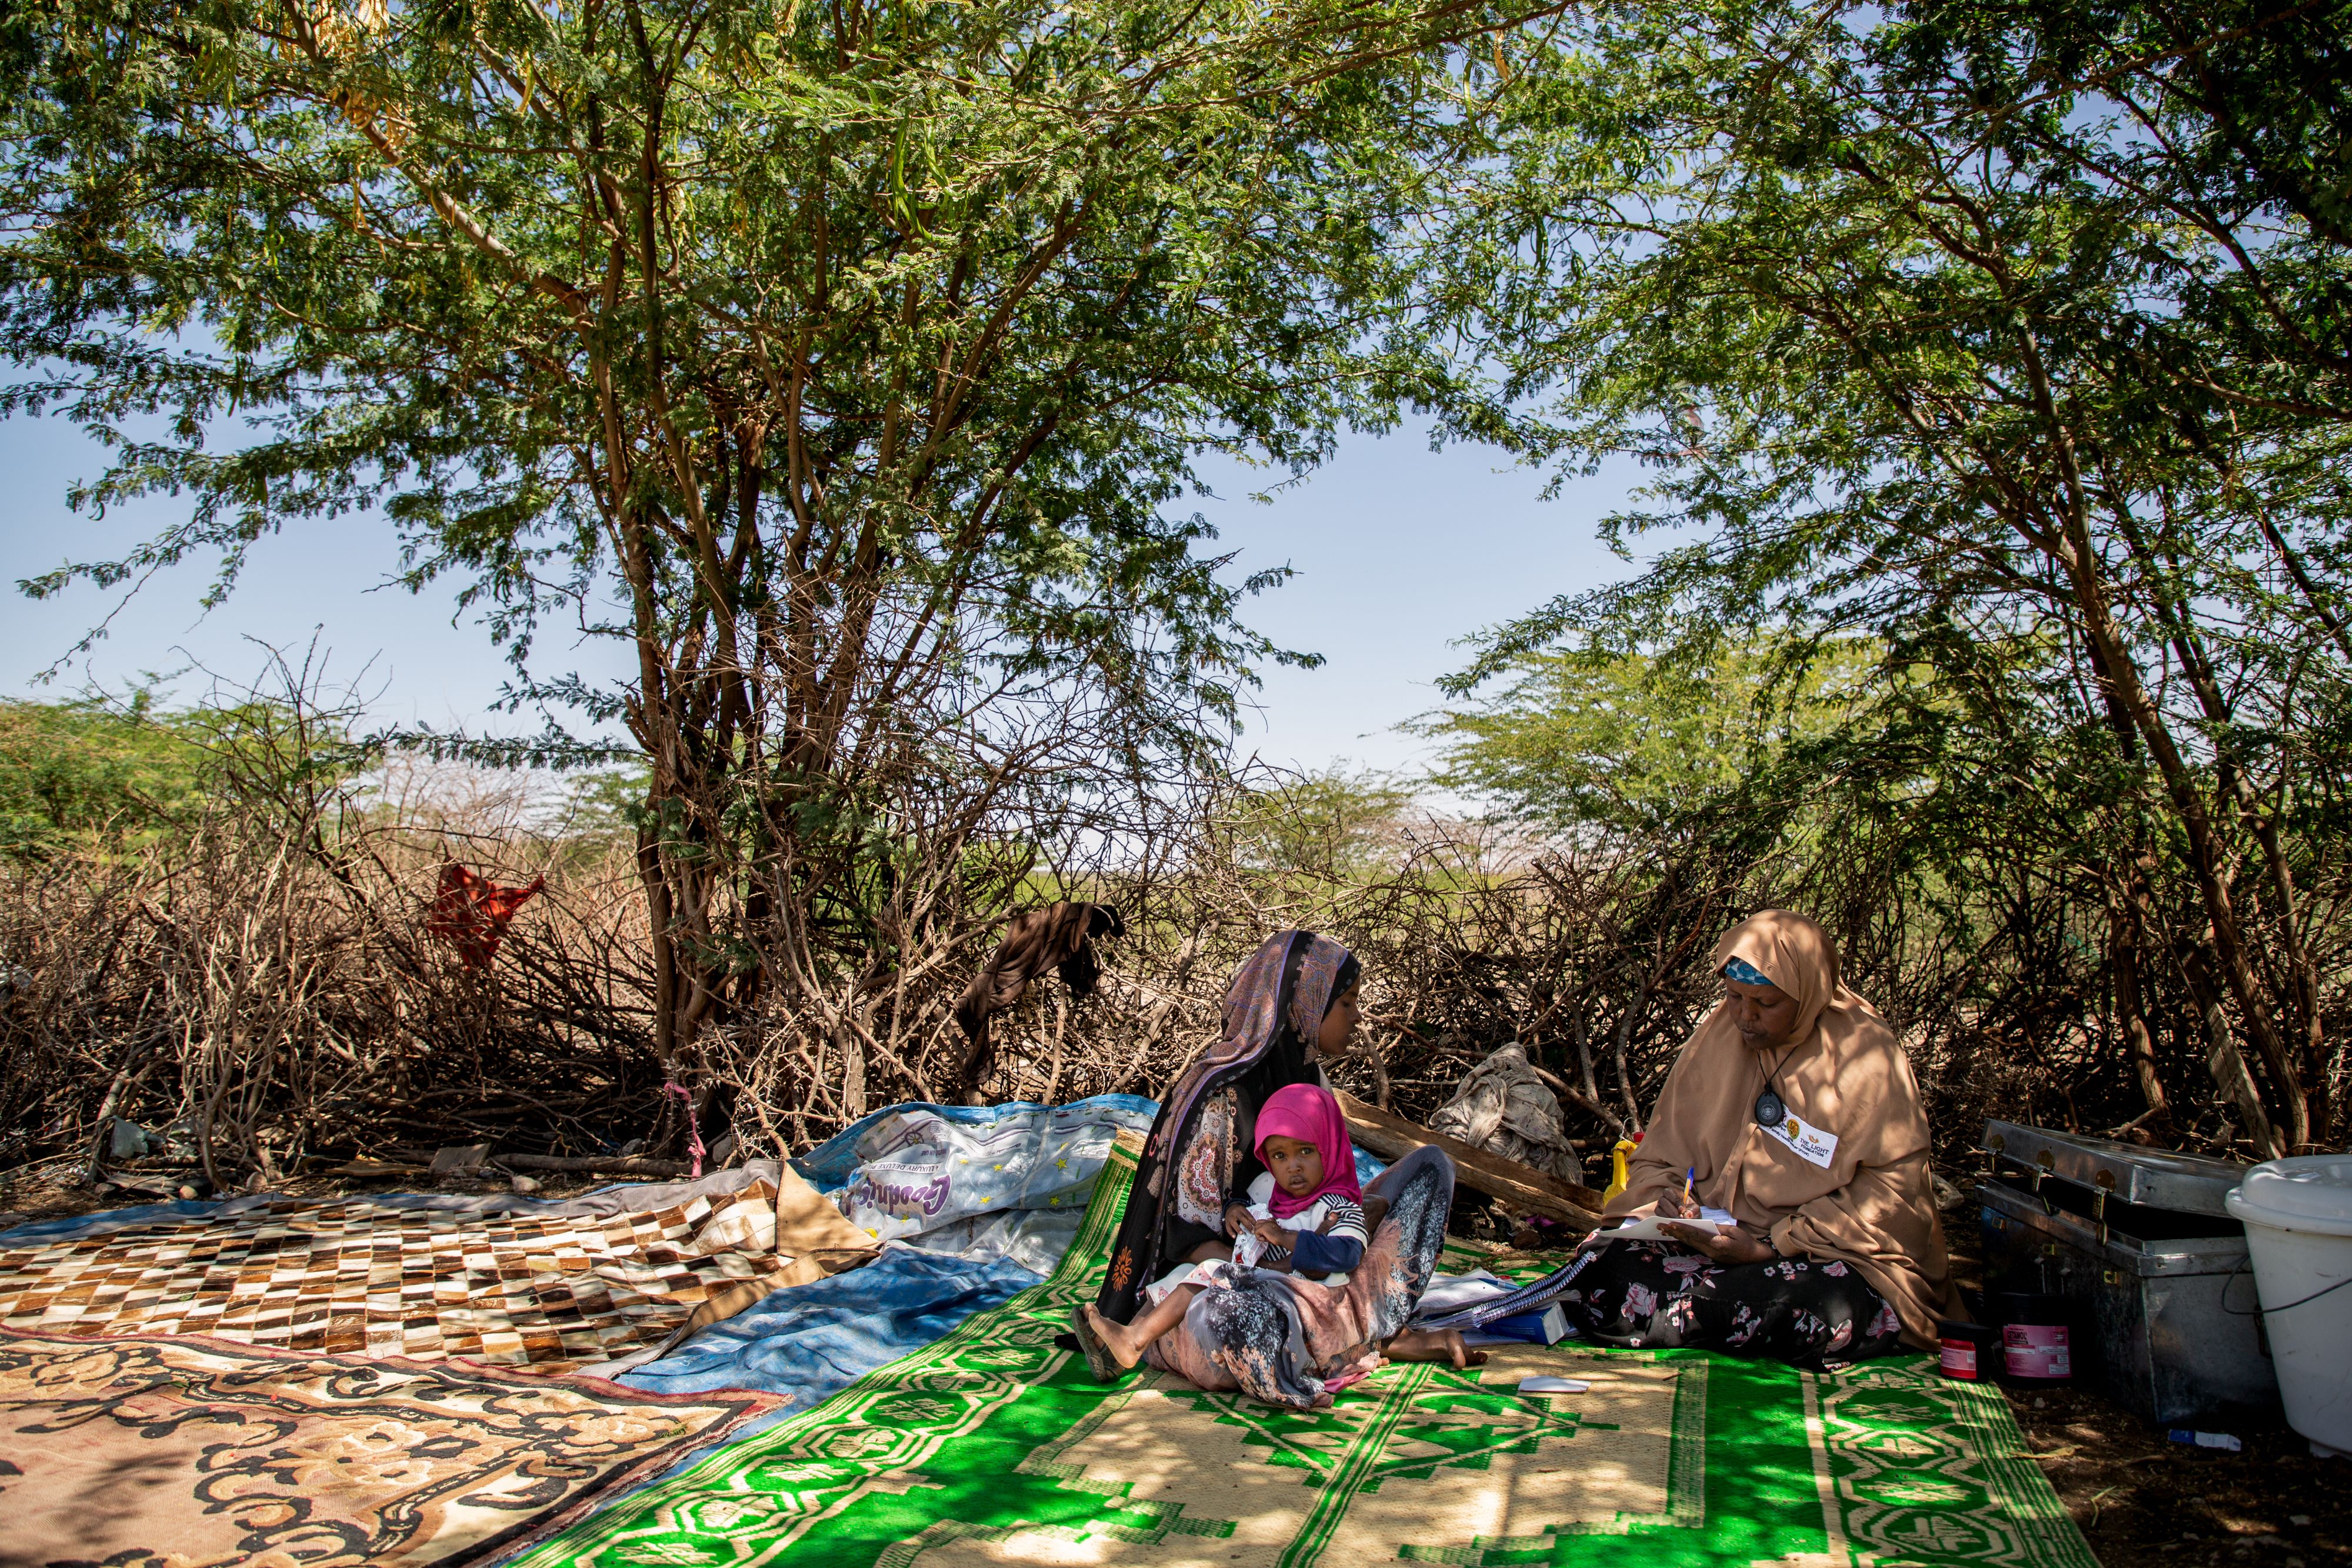 Two women and a small child sit on a green mat underneath trees in Somalia.